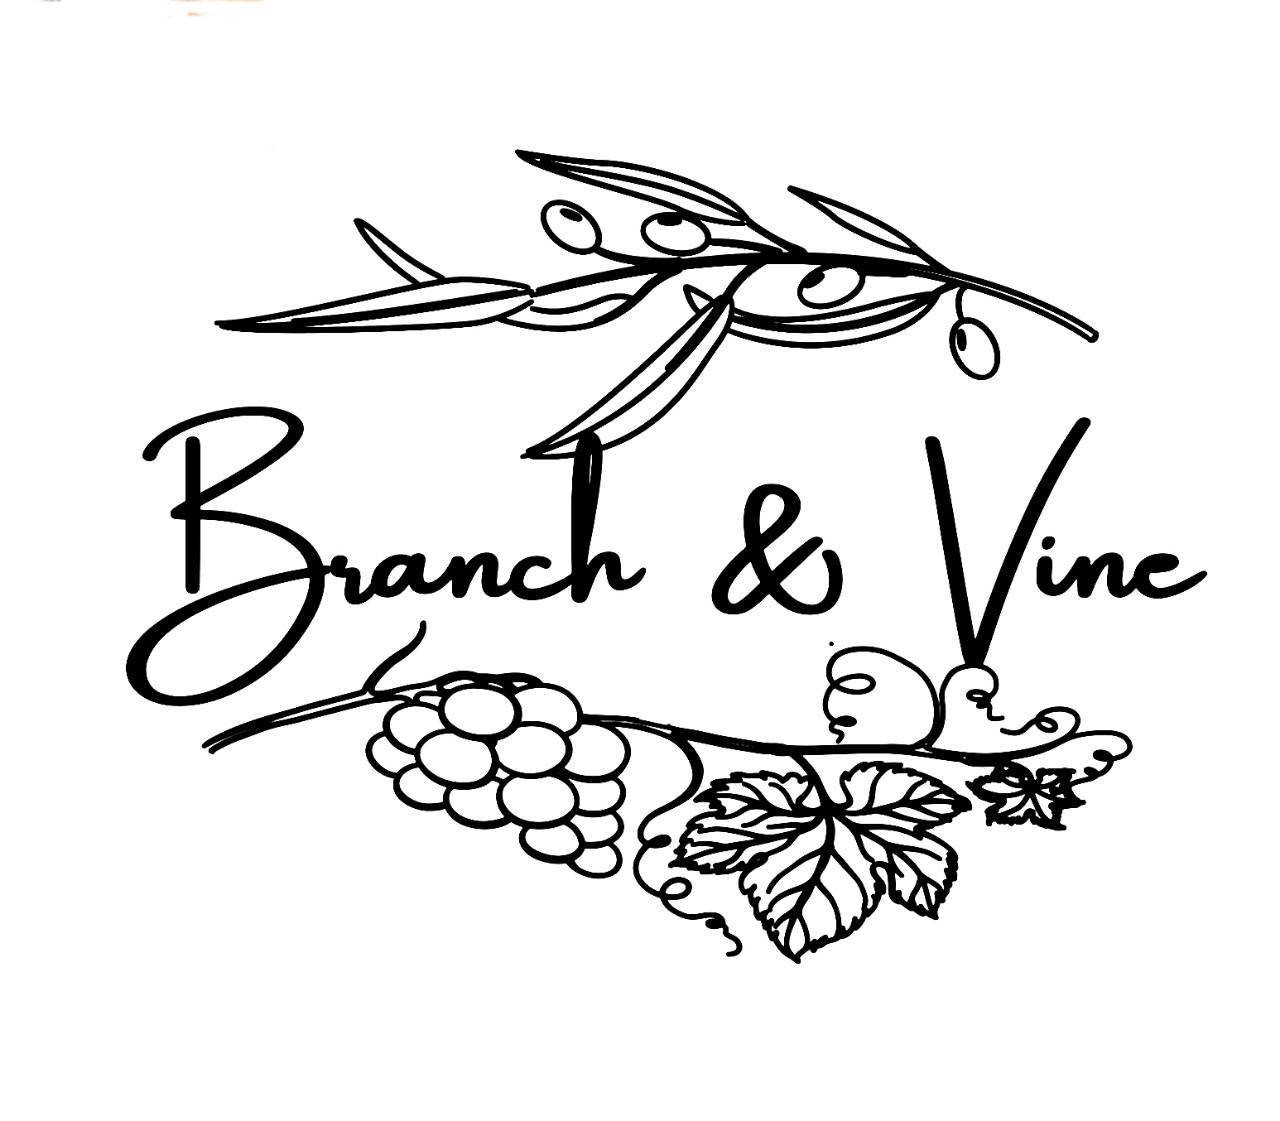 branch and vine